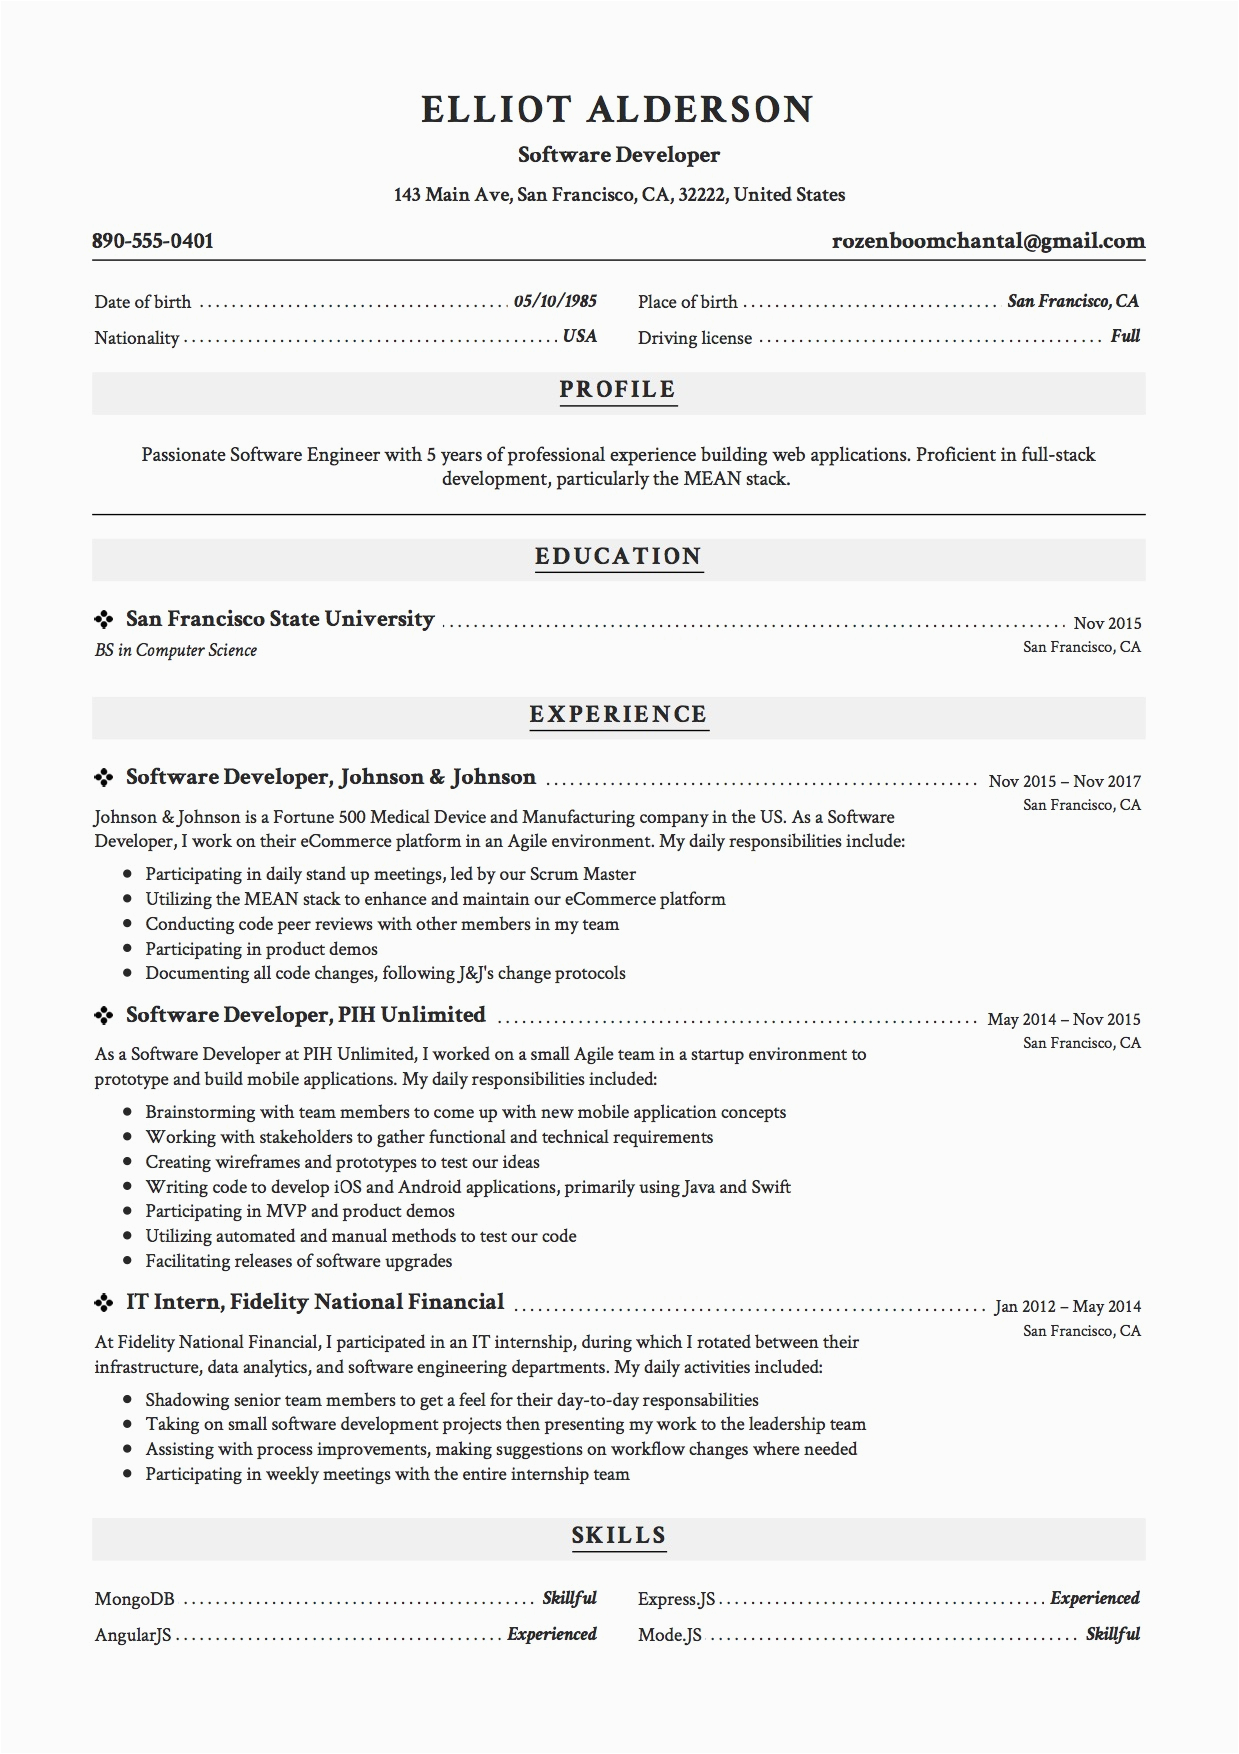 sample resume for software engineer with 3 years experience 367 545